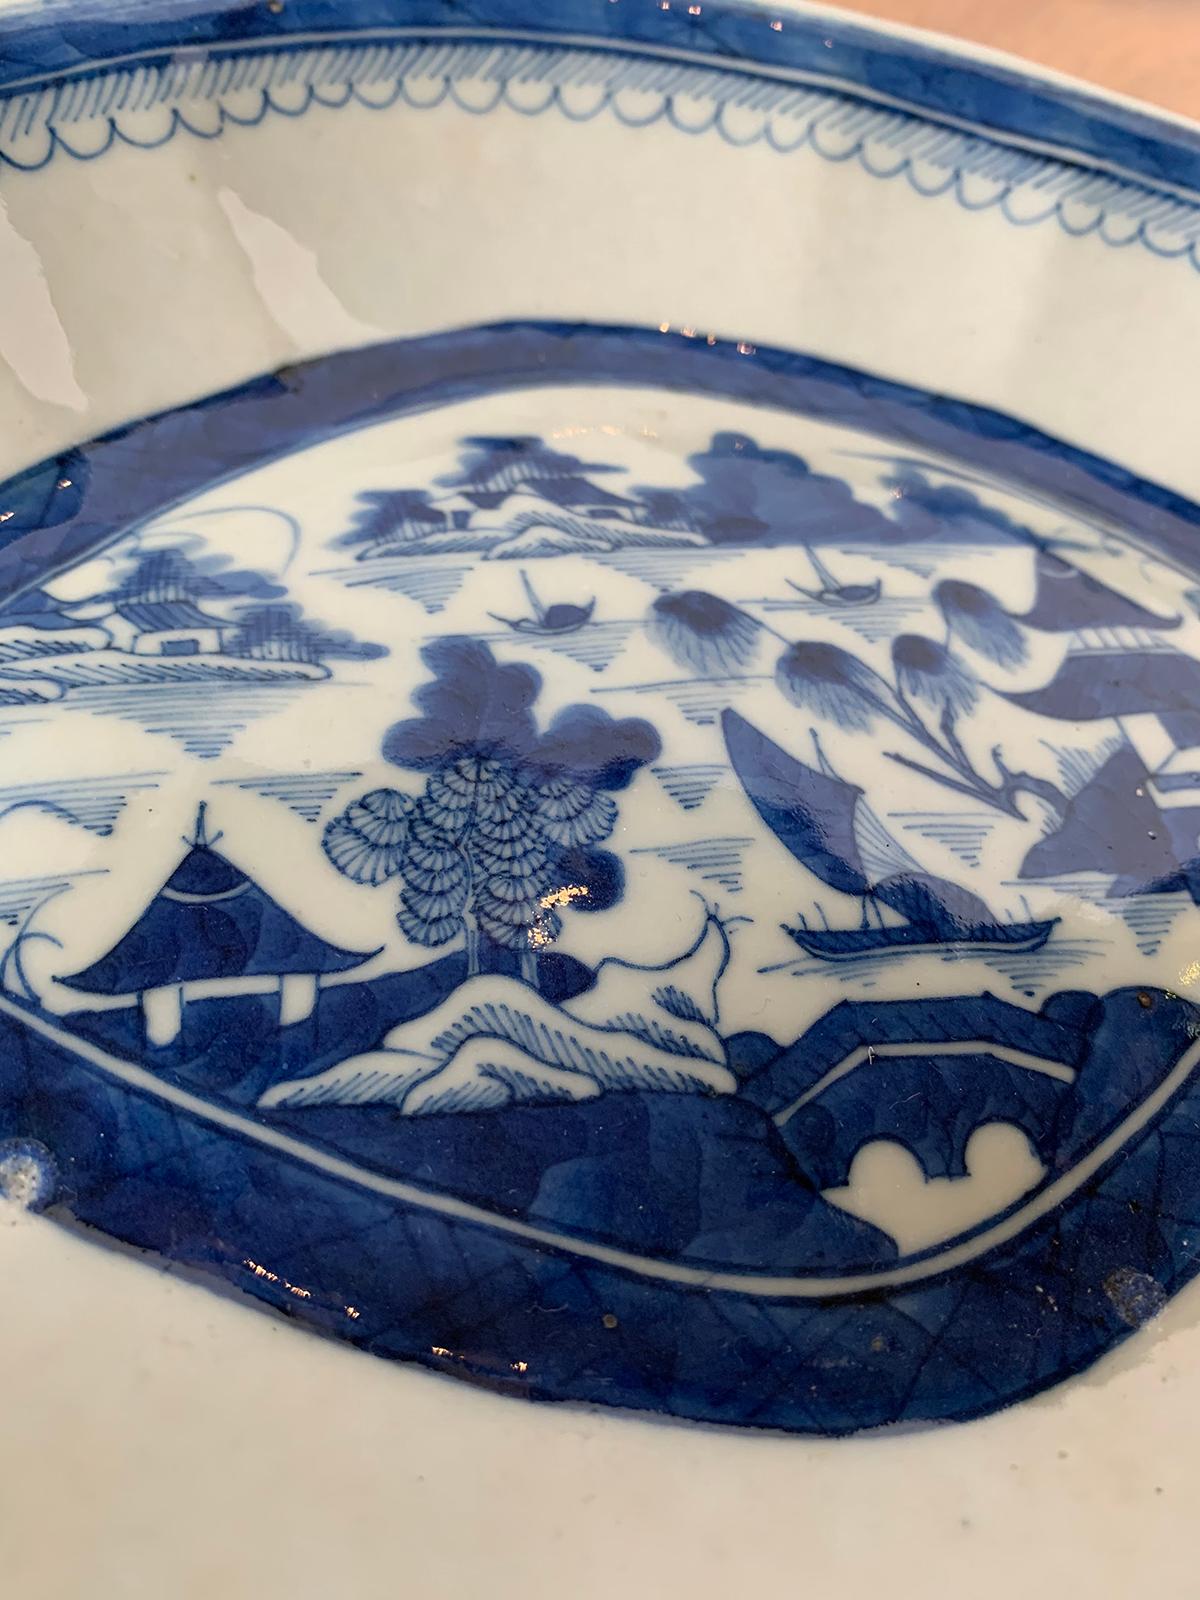 19th Century Chinese Export Canton Ware Oval Blue and White Porcelain Plate 7